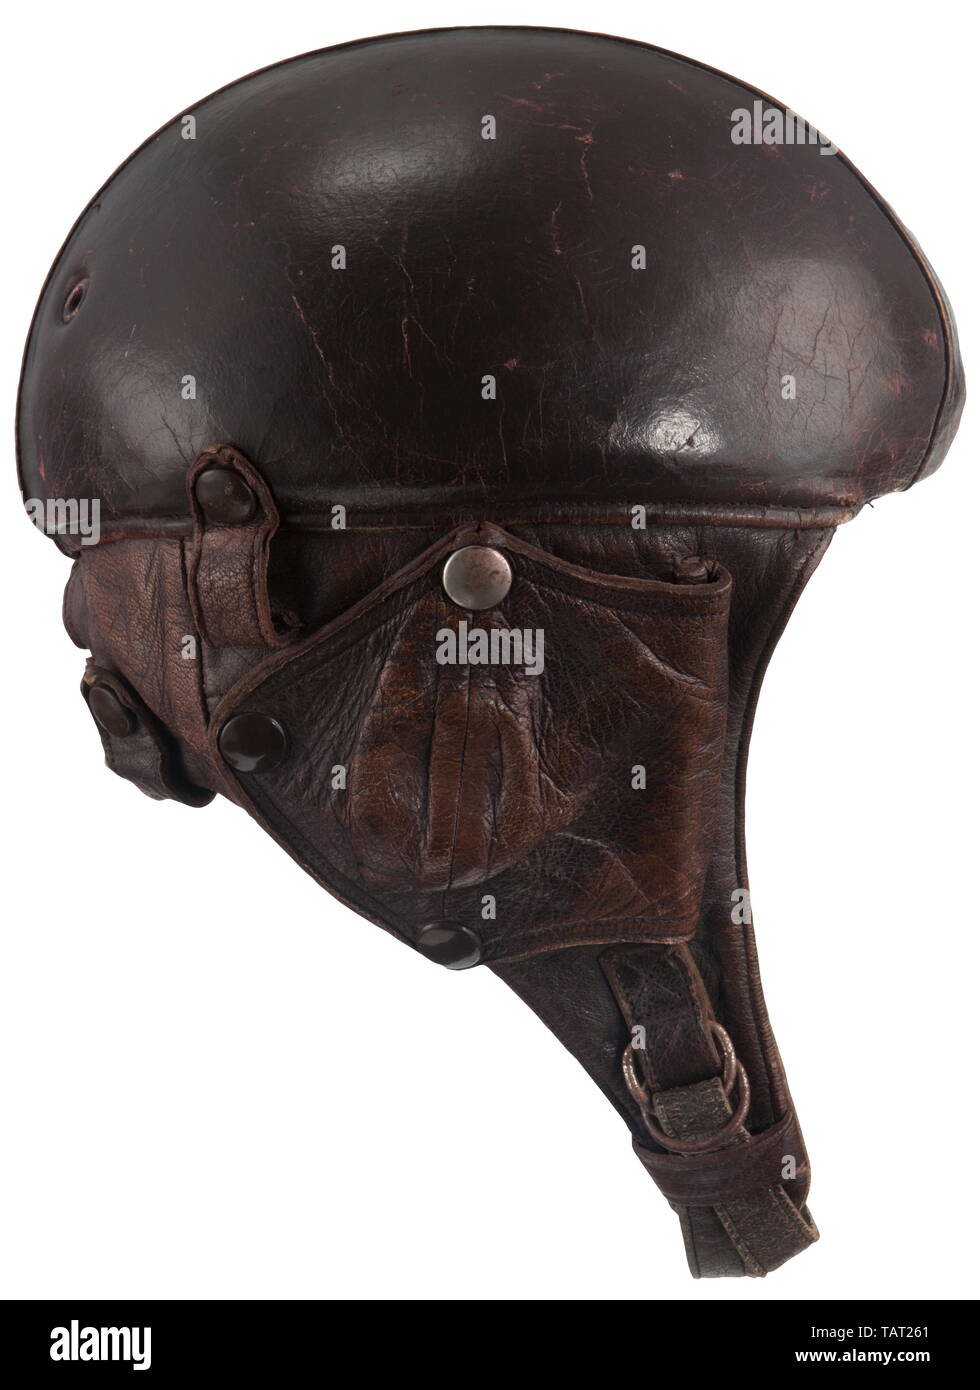 FRANCE, General Viktor d'Urbal (1858 - 1943) - a M 1913 helmet for cavalry officers, which he wore from his promotion to divisional general and commander of the 7th Cavalry Division on 30 August 1914 until he took over comand of the 33rd Corps on 20 September 1914. Nickel-plated skull, gilt mountings, black falling horsehair crest, three silver rank stars and commander's horizontal bar on the front plate. Complete with interior leather lining (somewhat damaged). Comes with the extremely rare, light blue cover (severe moth damage) which also displays three rank stars and the, Editorial-Use-Only Stock Photo